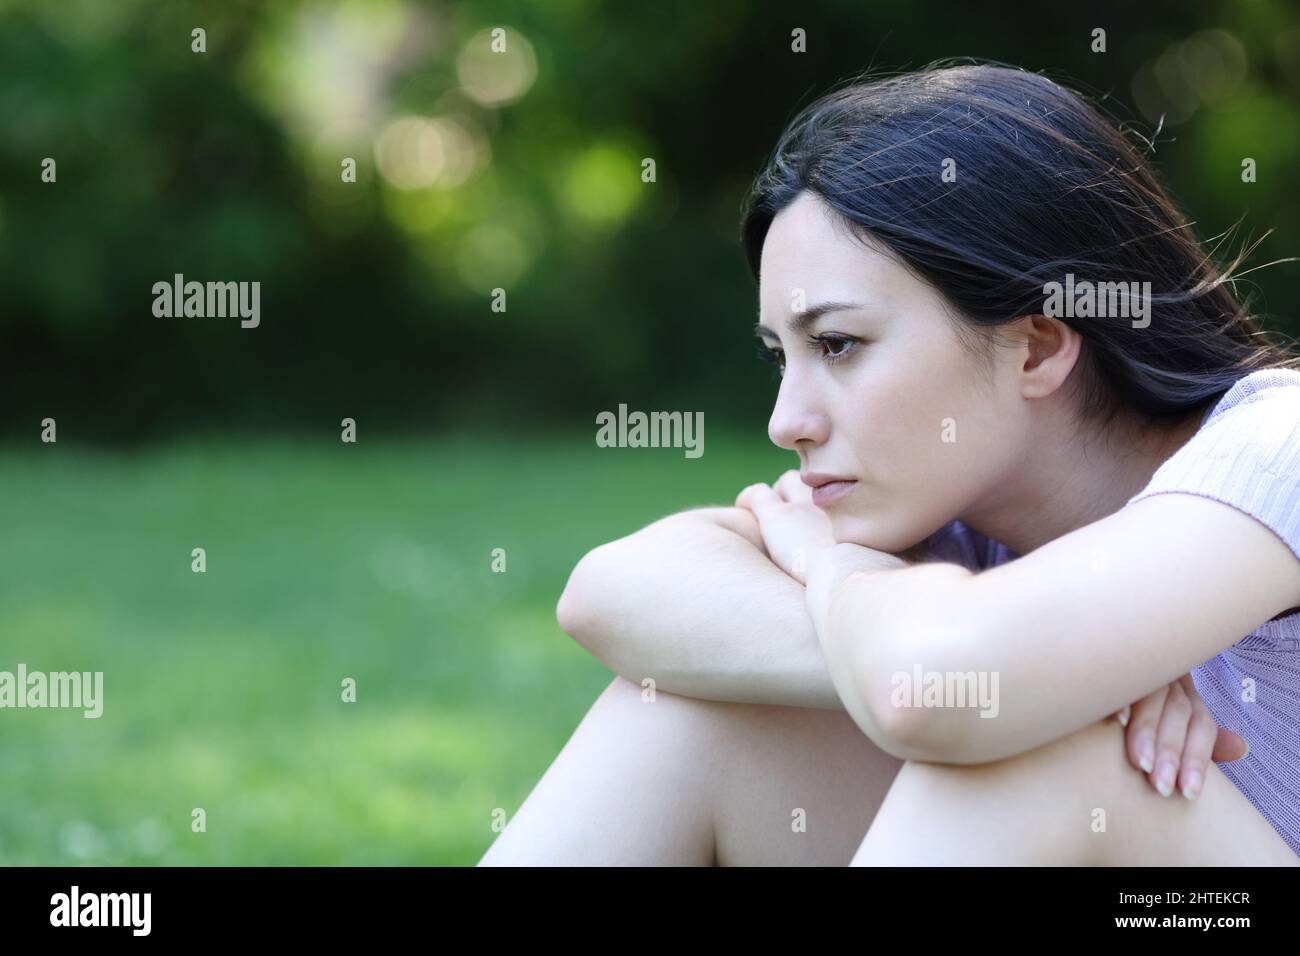 Sad asian woman complaining looking away sitting alone in a park Stock Photo